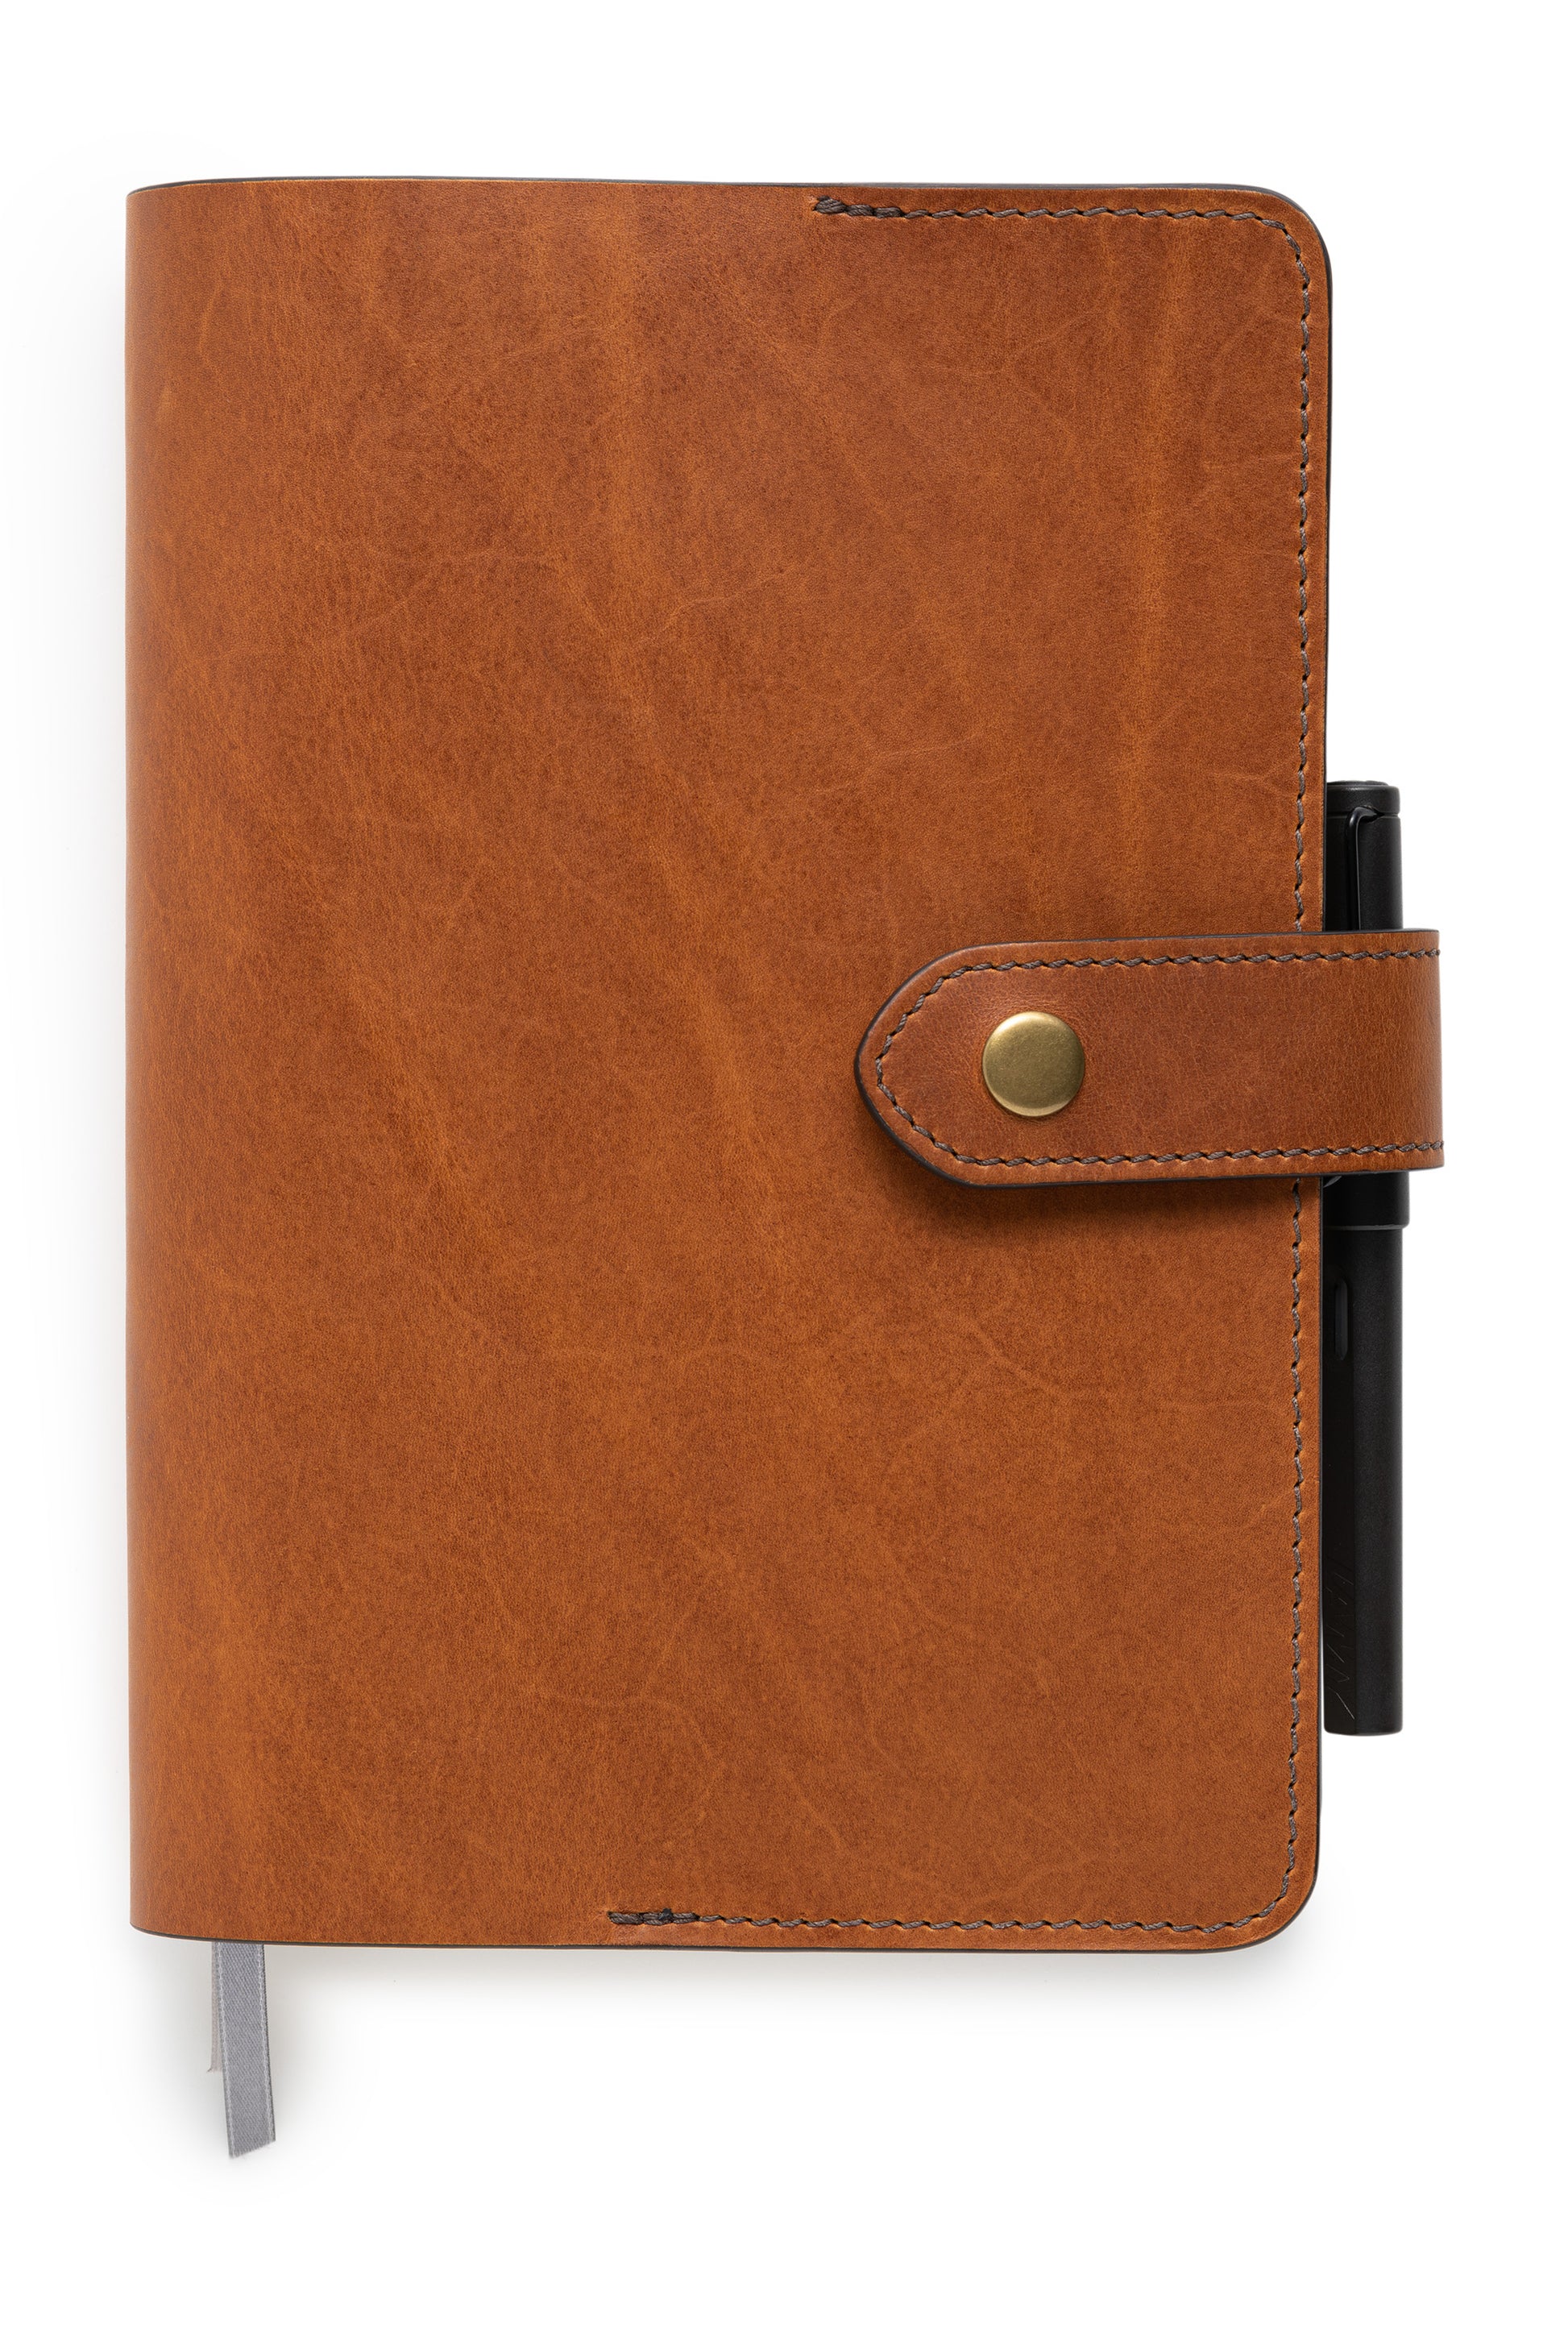 full grain leather planner cover to fit full focus planner by Michael Hyatt in saddle tan front